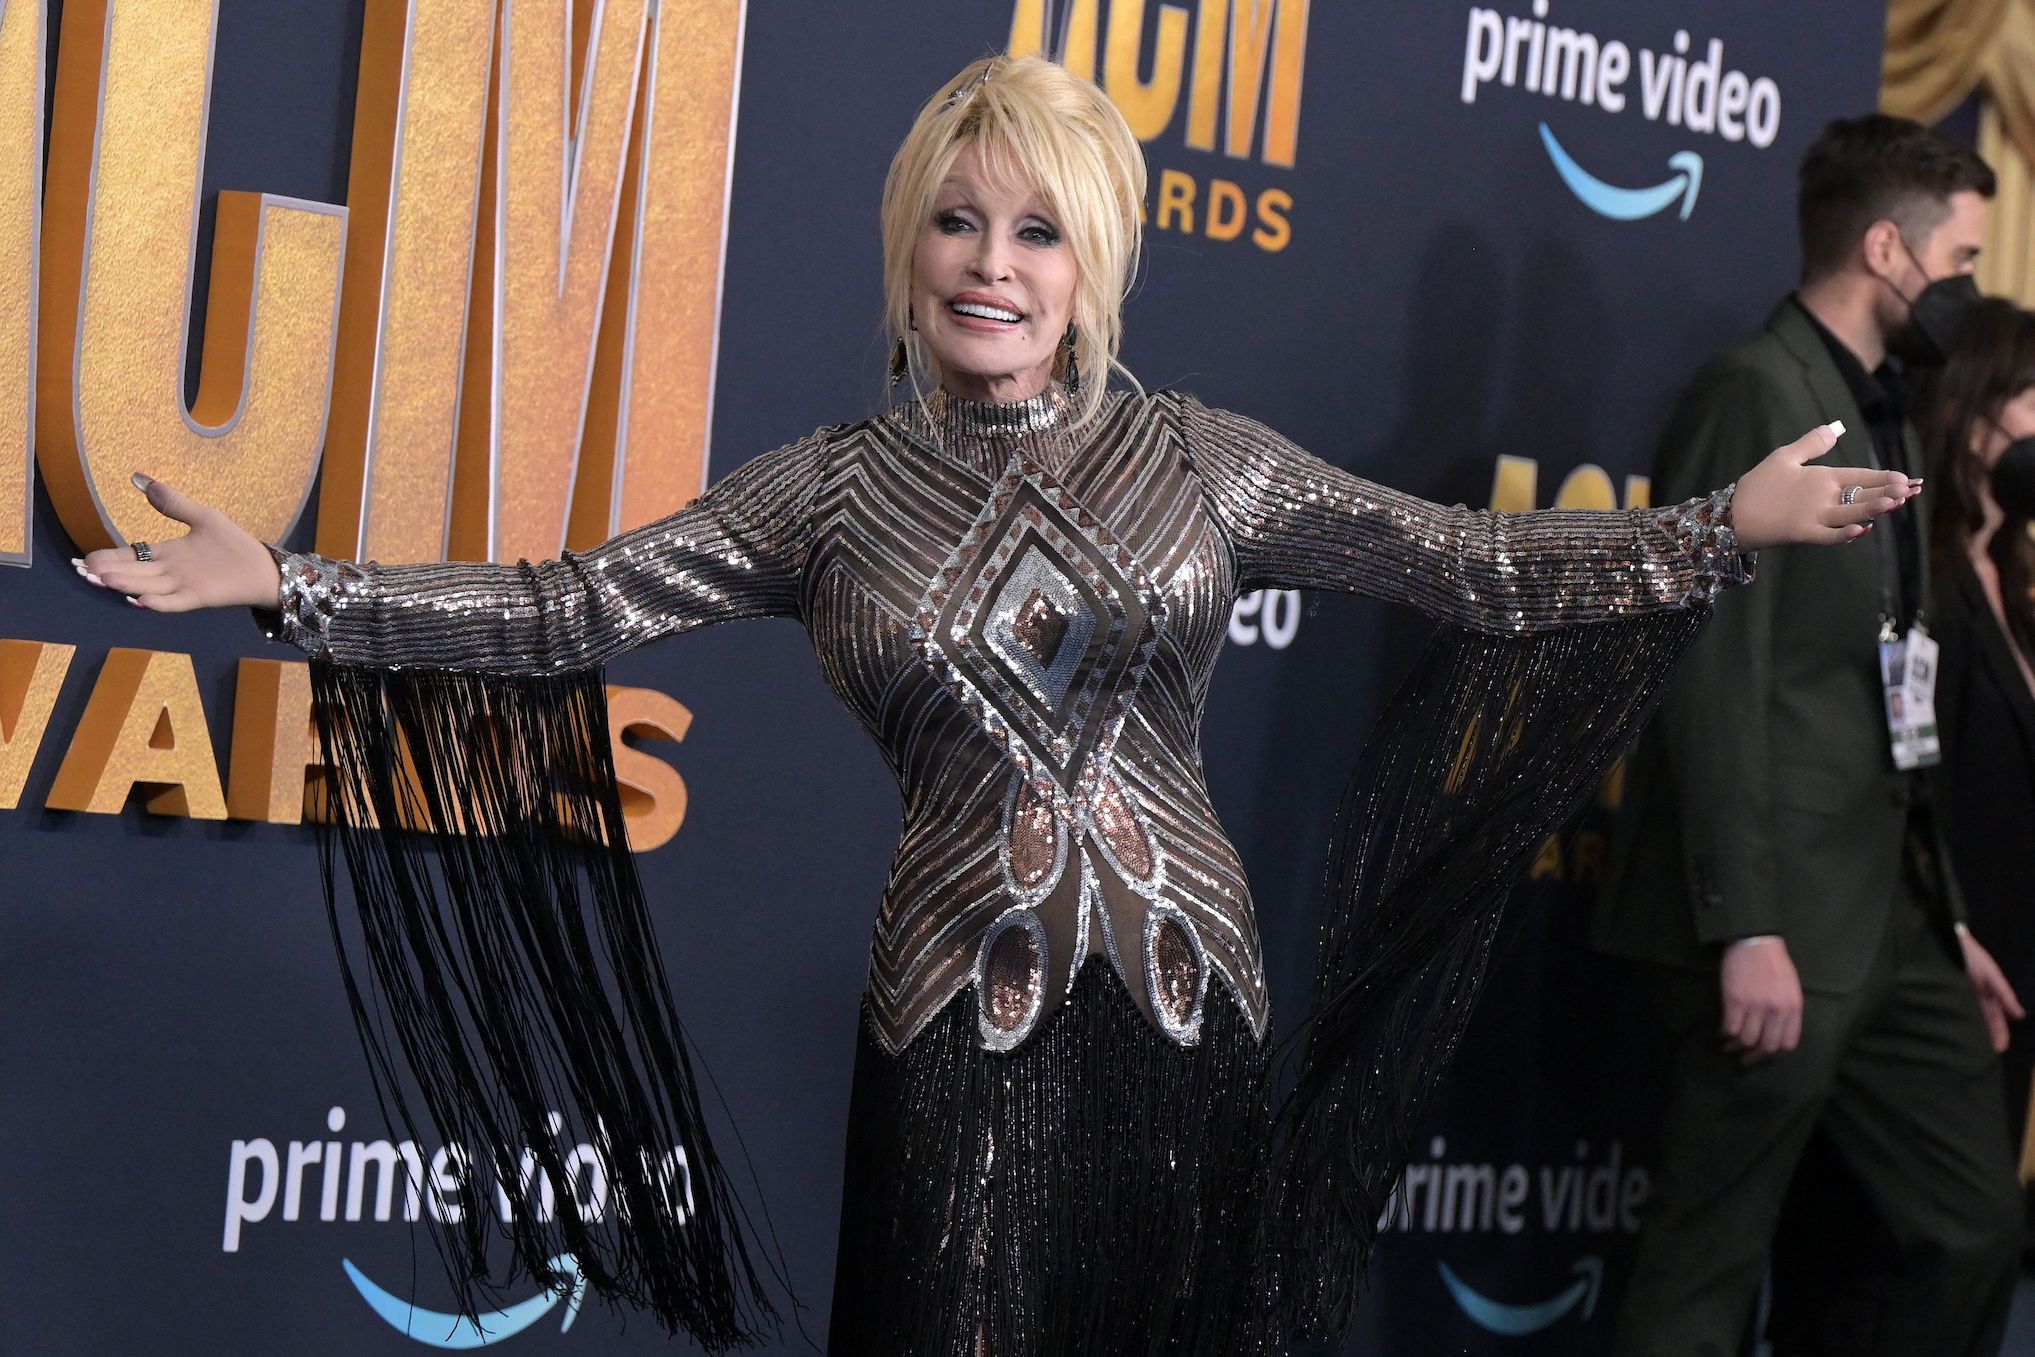 Dolly Parton arrives at the 57th Academy of Country Music Awards in Las Vegas, Nevada